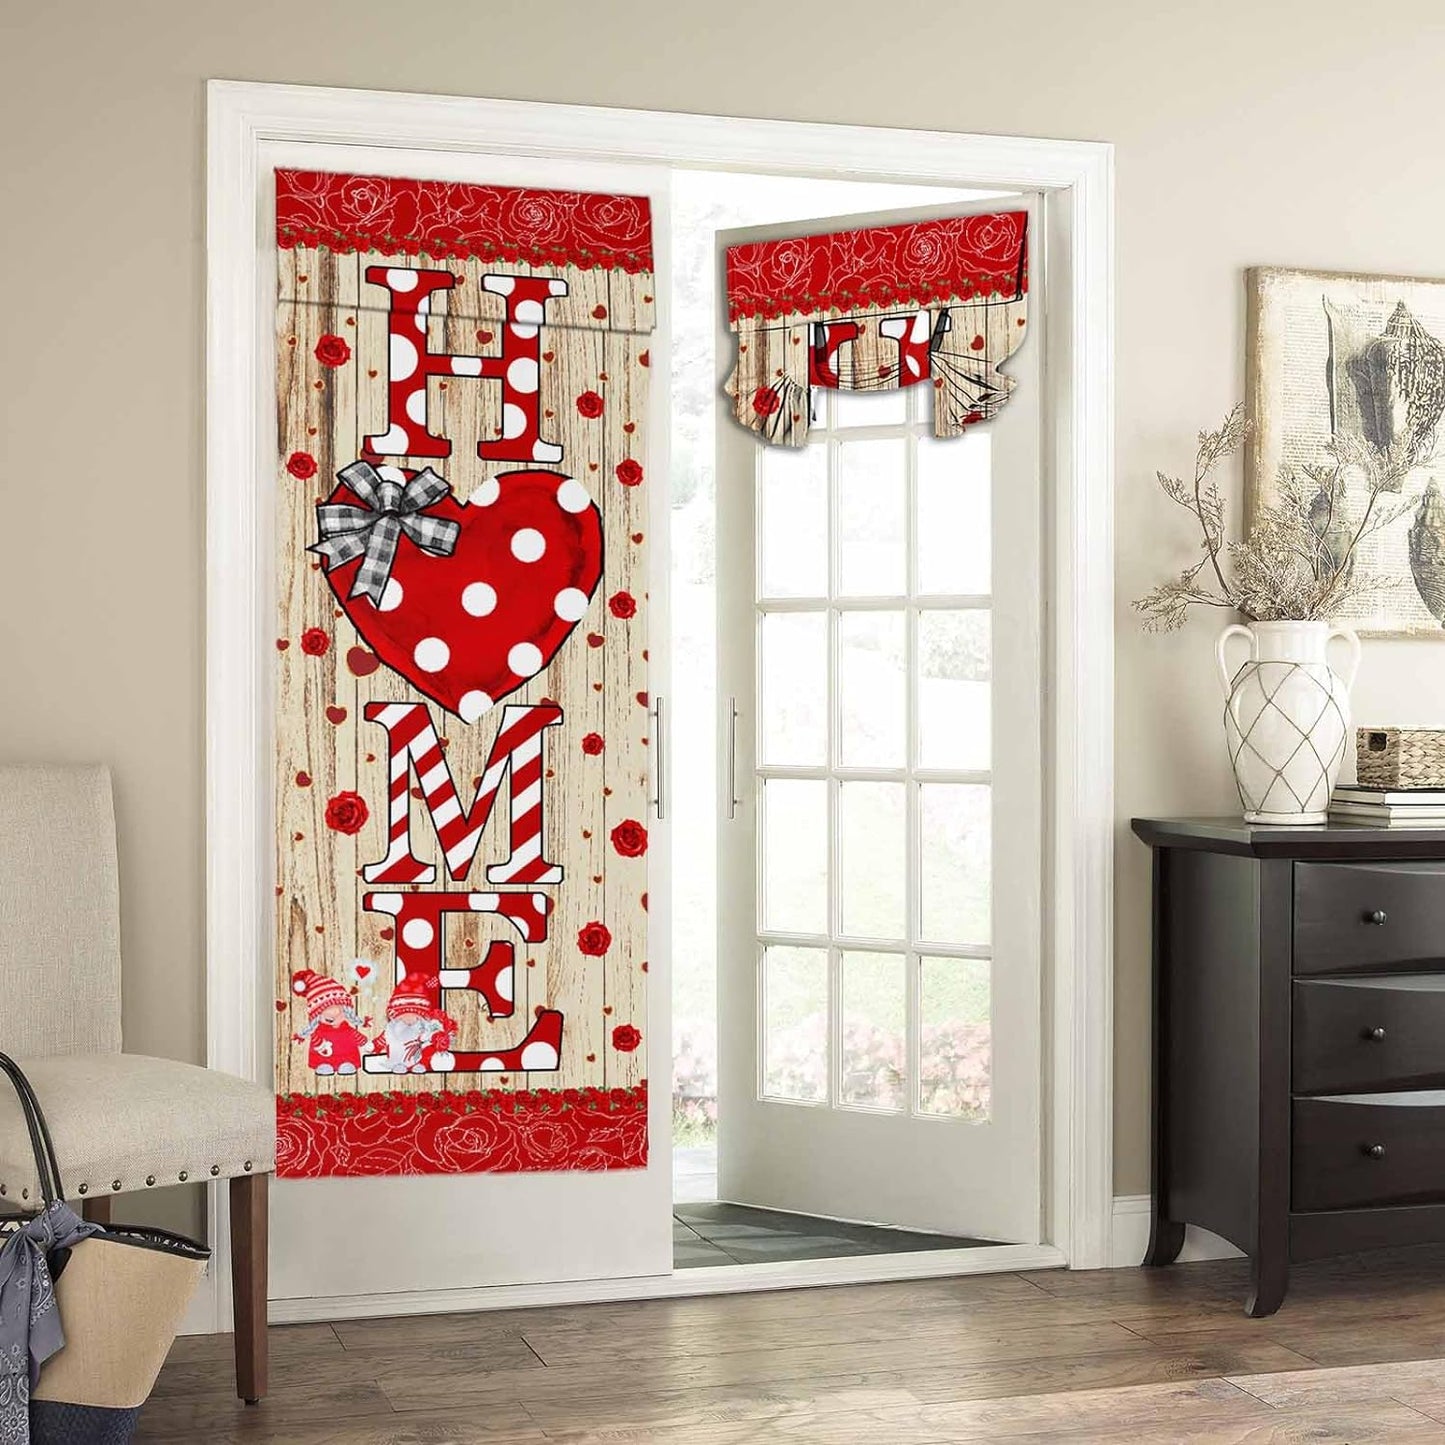 BEMIGO Door Curtains for Door Windows, Vintage Wooden Door Window Curtains for French Glass Door, Privacy Thermal Insulated Tie up Door Shades, Farmhouse Colorful Small Window Curtains 26 X 42 Inch  BEMIGO Red Valentine 70.00" X 26.00" 